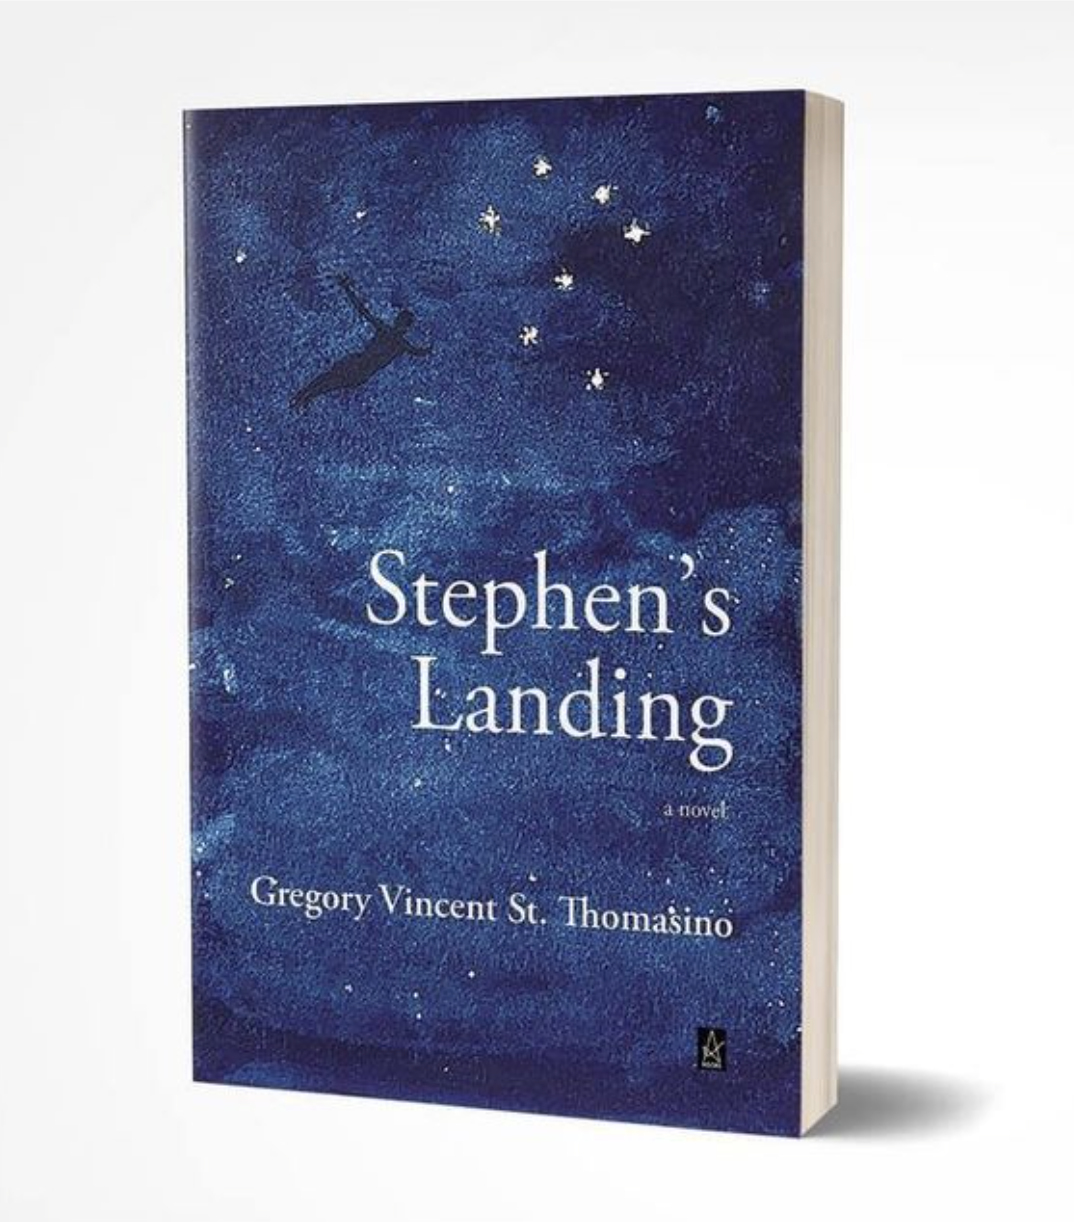 Stephen's Landing — a novel by Gregory Vincent St. Thomasino